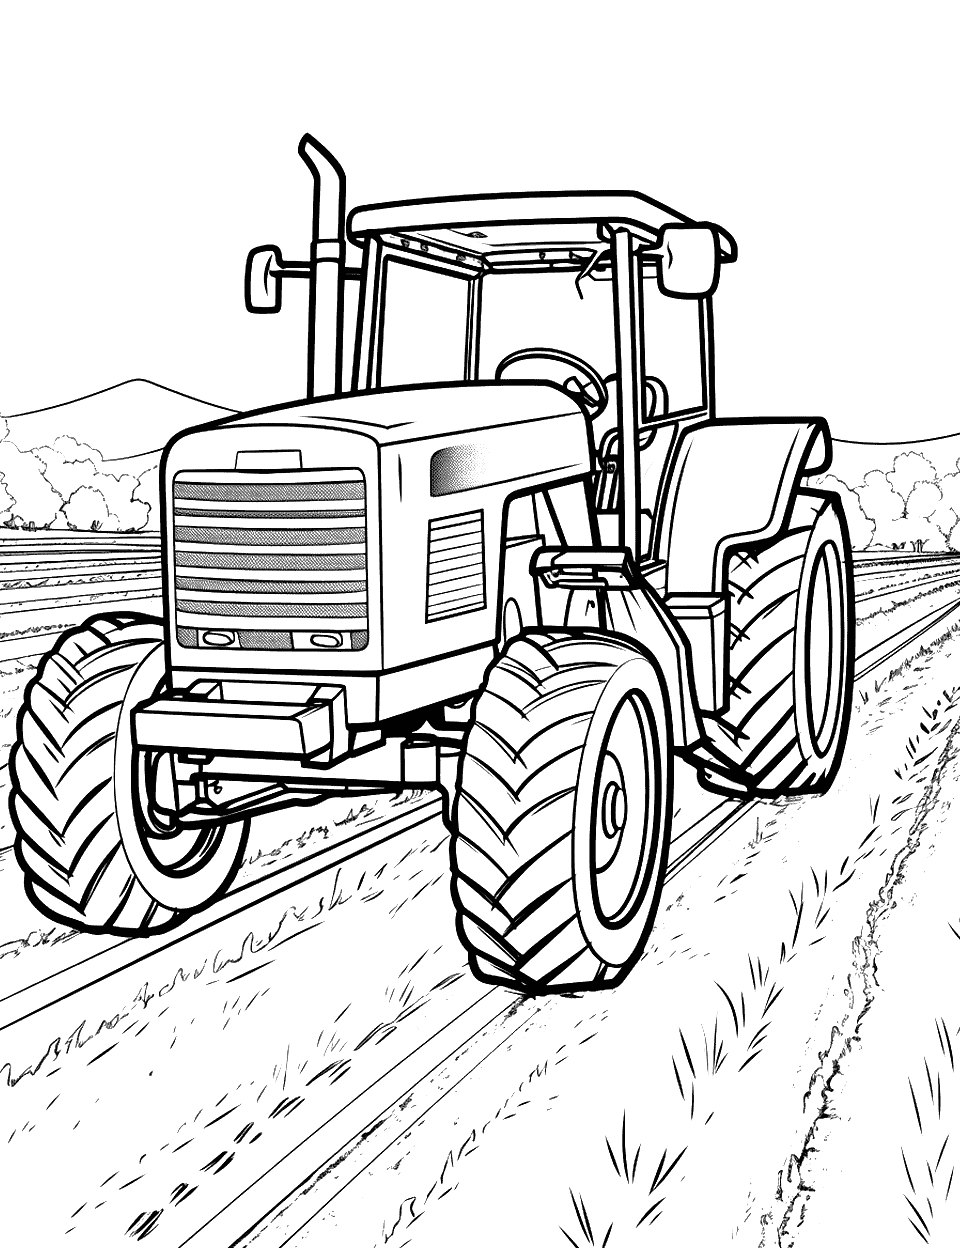 Tractor in the Field Coloring Page - A tractor plowing a field with rows of freshly turned soil.